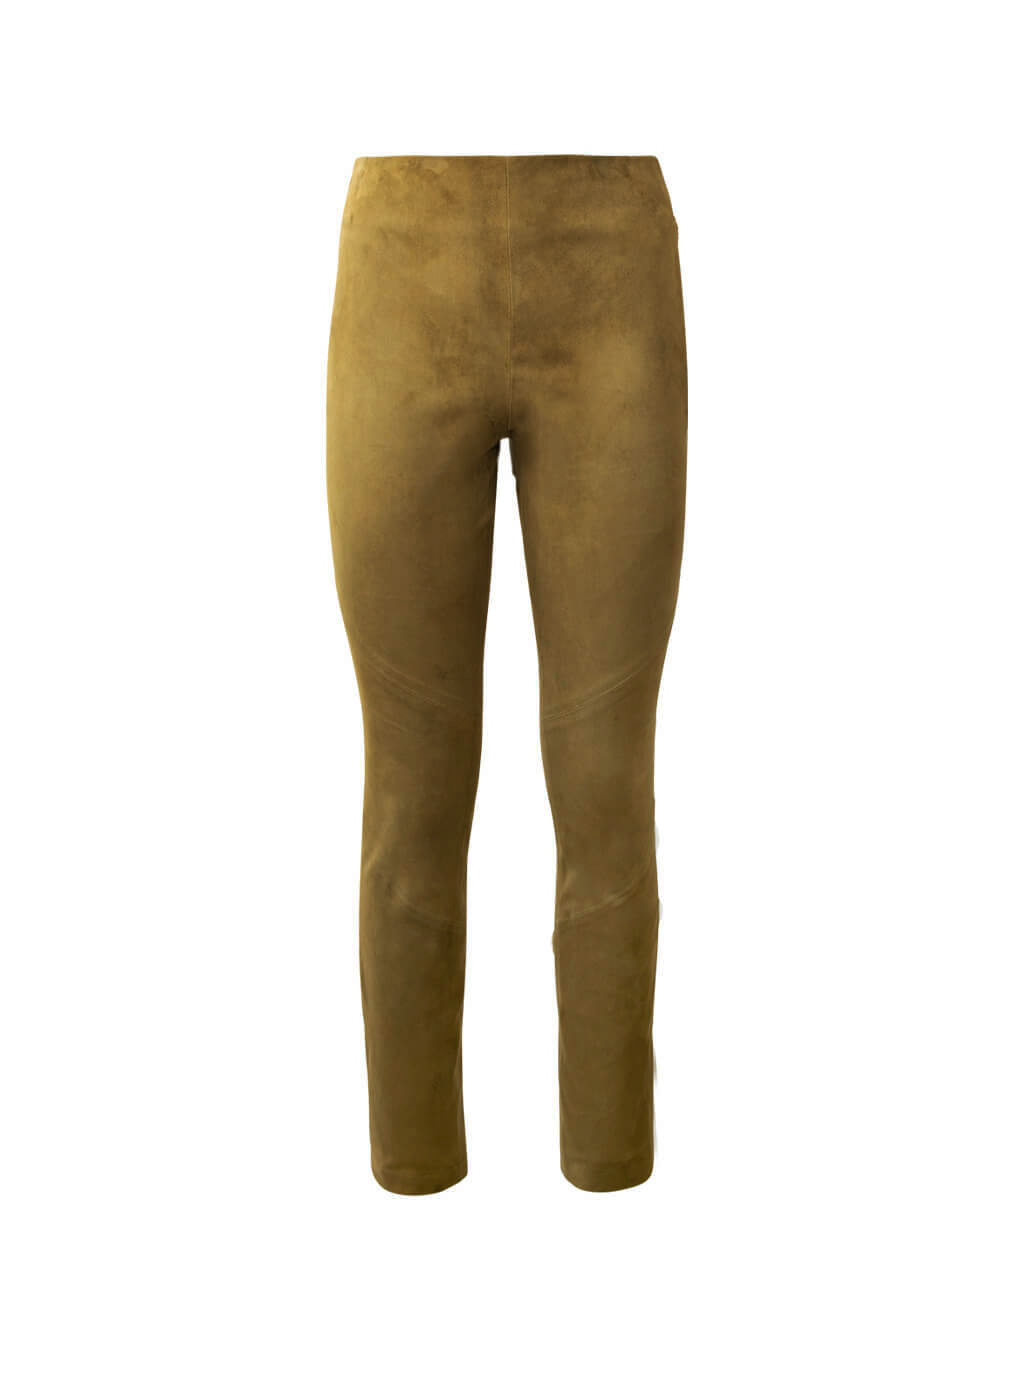 Goat Leather Trousers Stretch Women “Penny Lane”, hunting